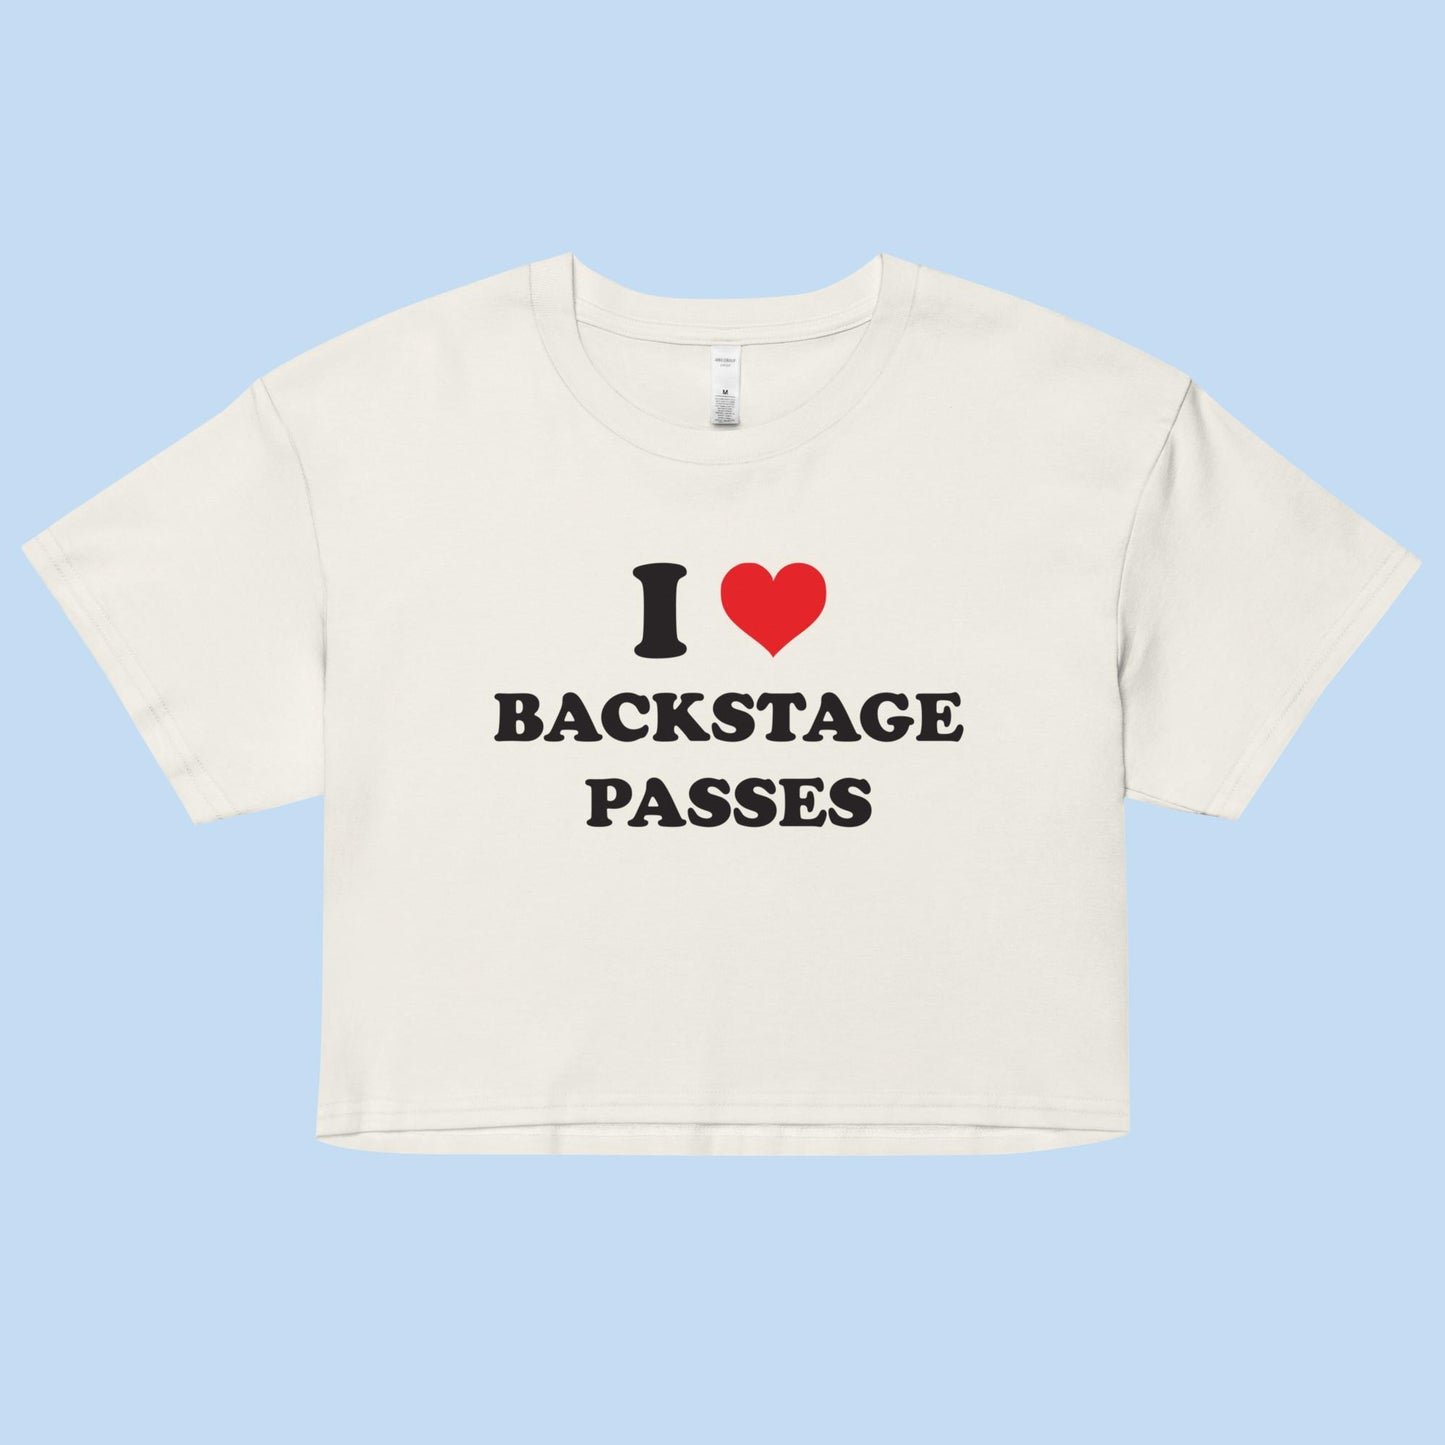 I Love Backstage Passes Women’s Boxy Crop Top